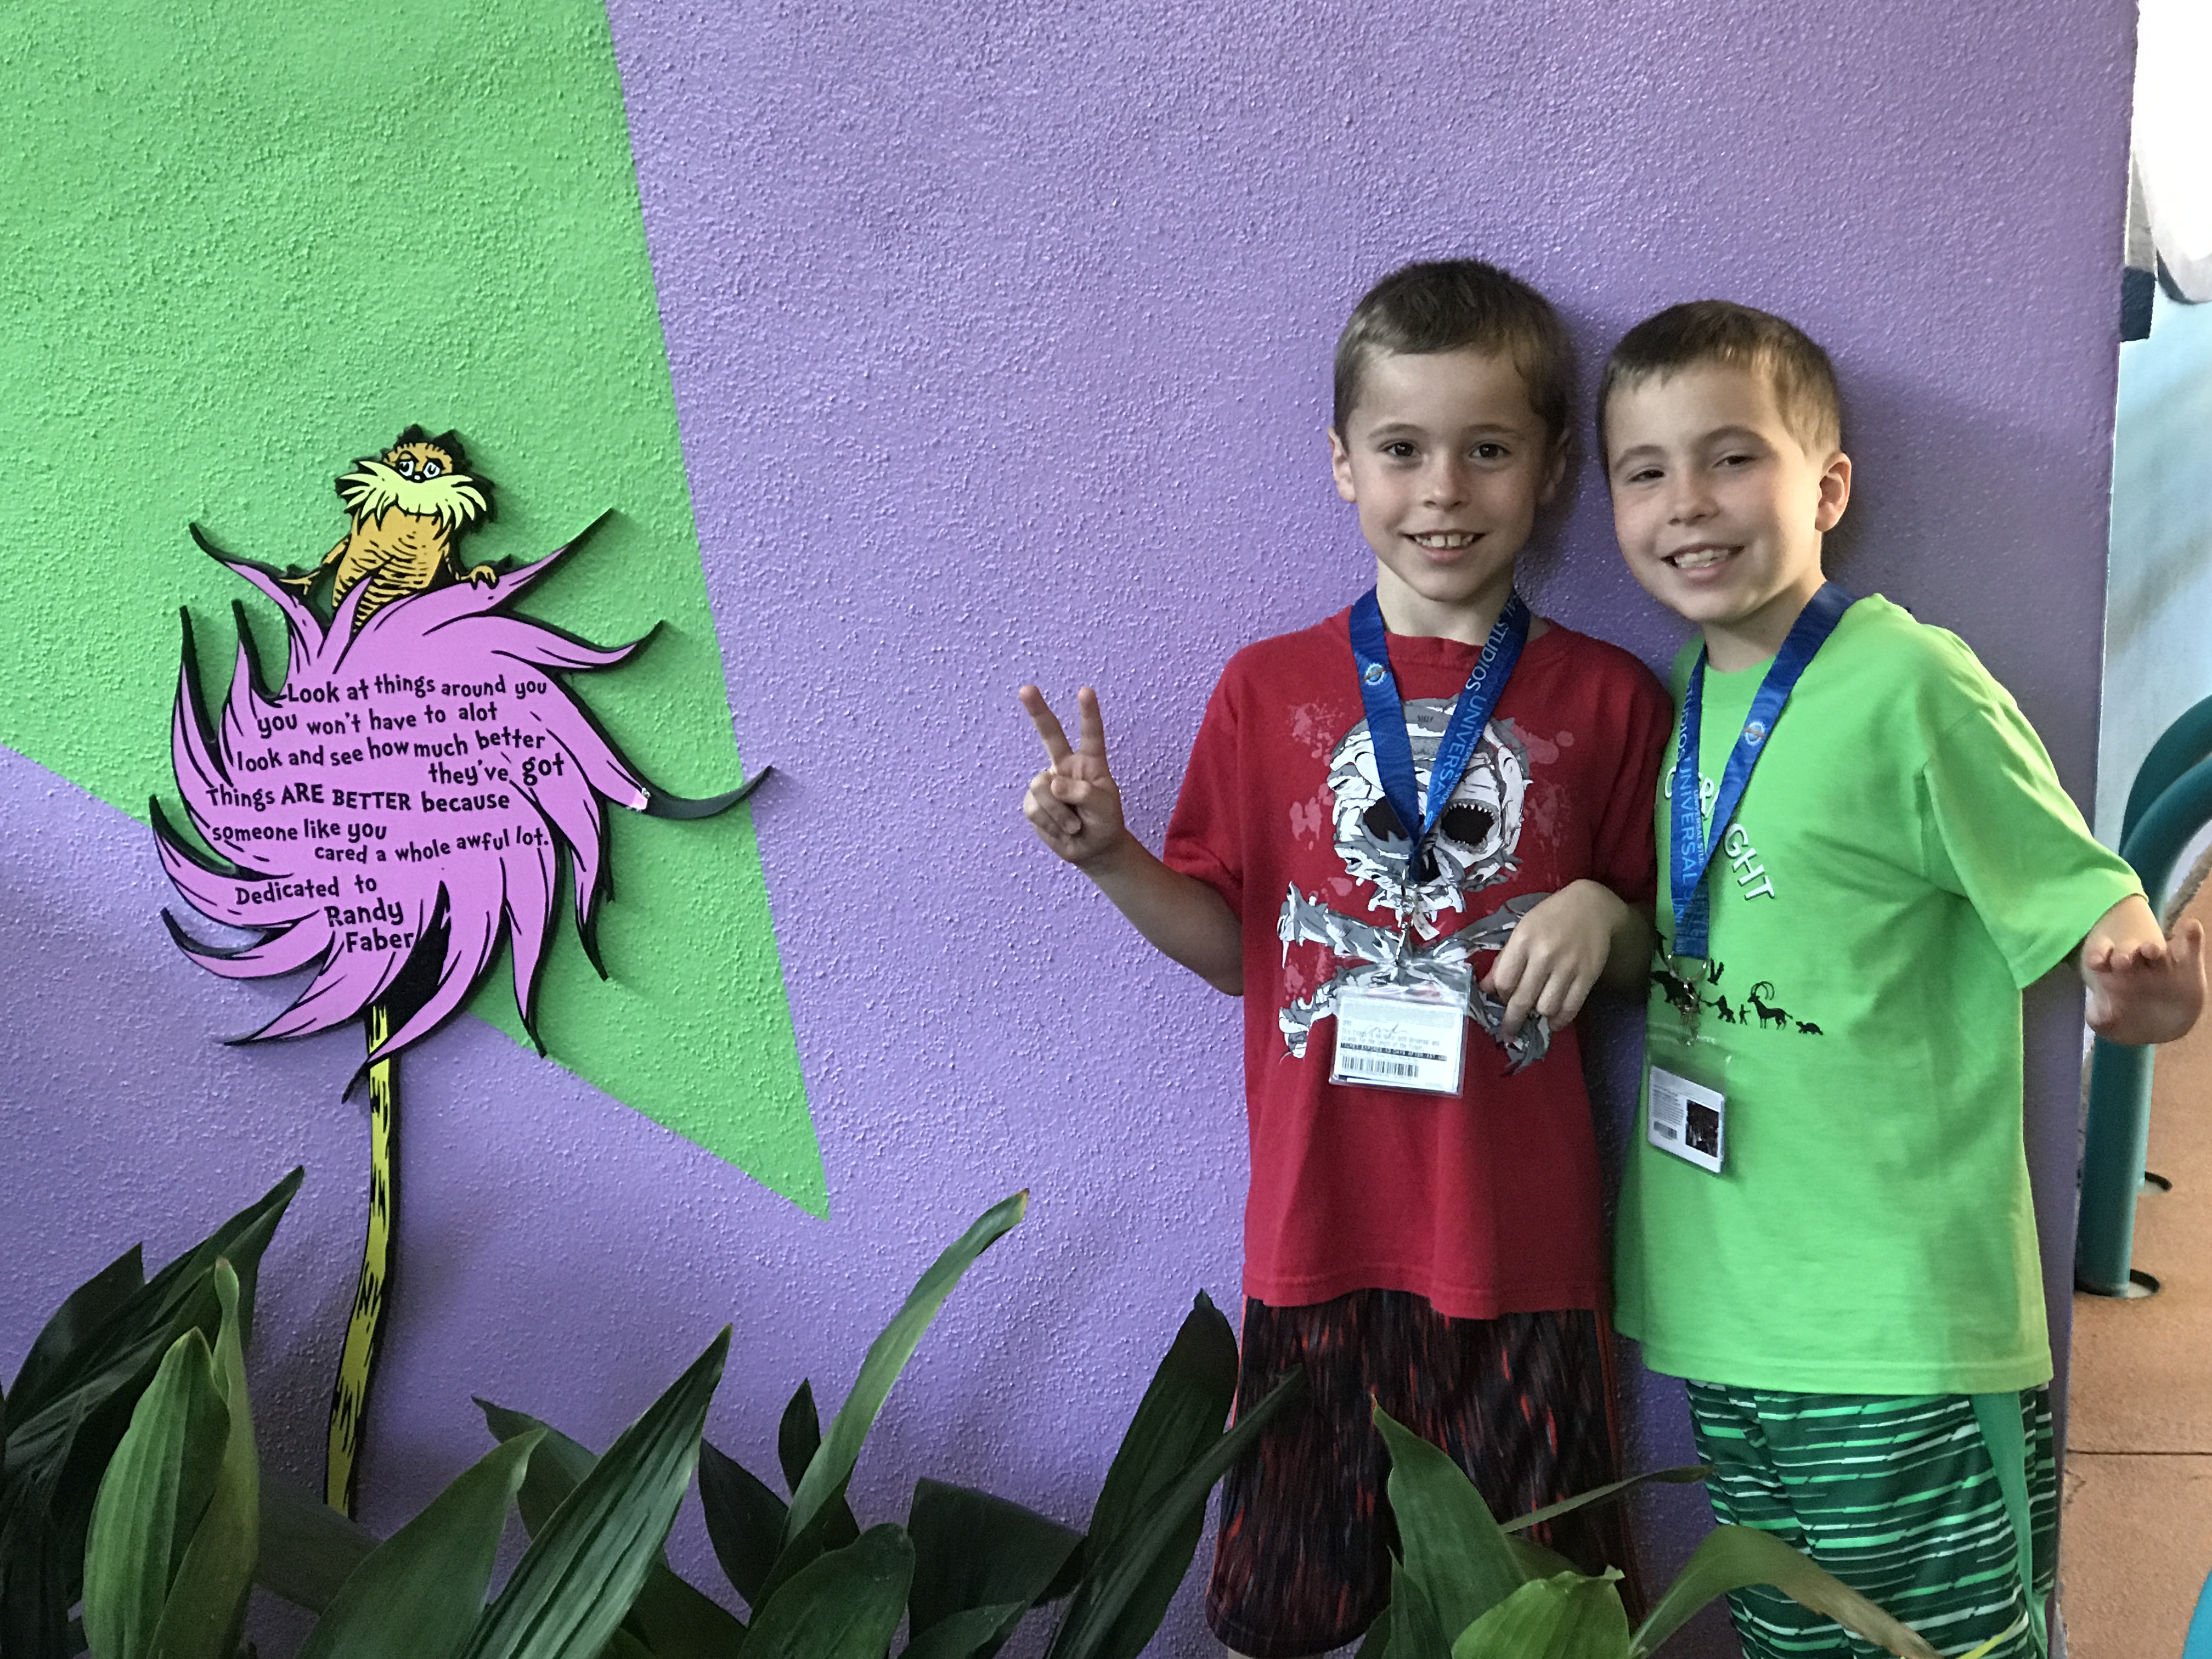 Campaign Founder's Twins support The Lorax Project